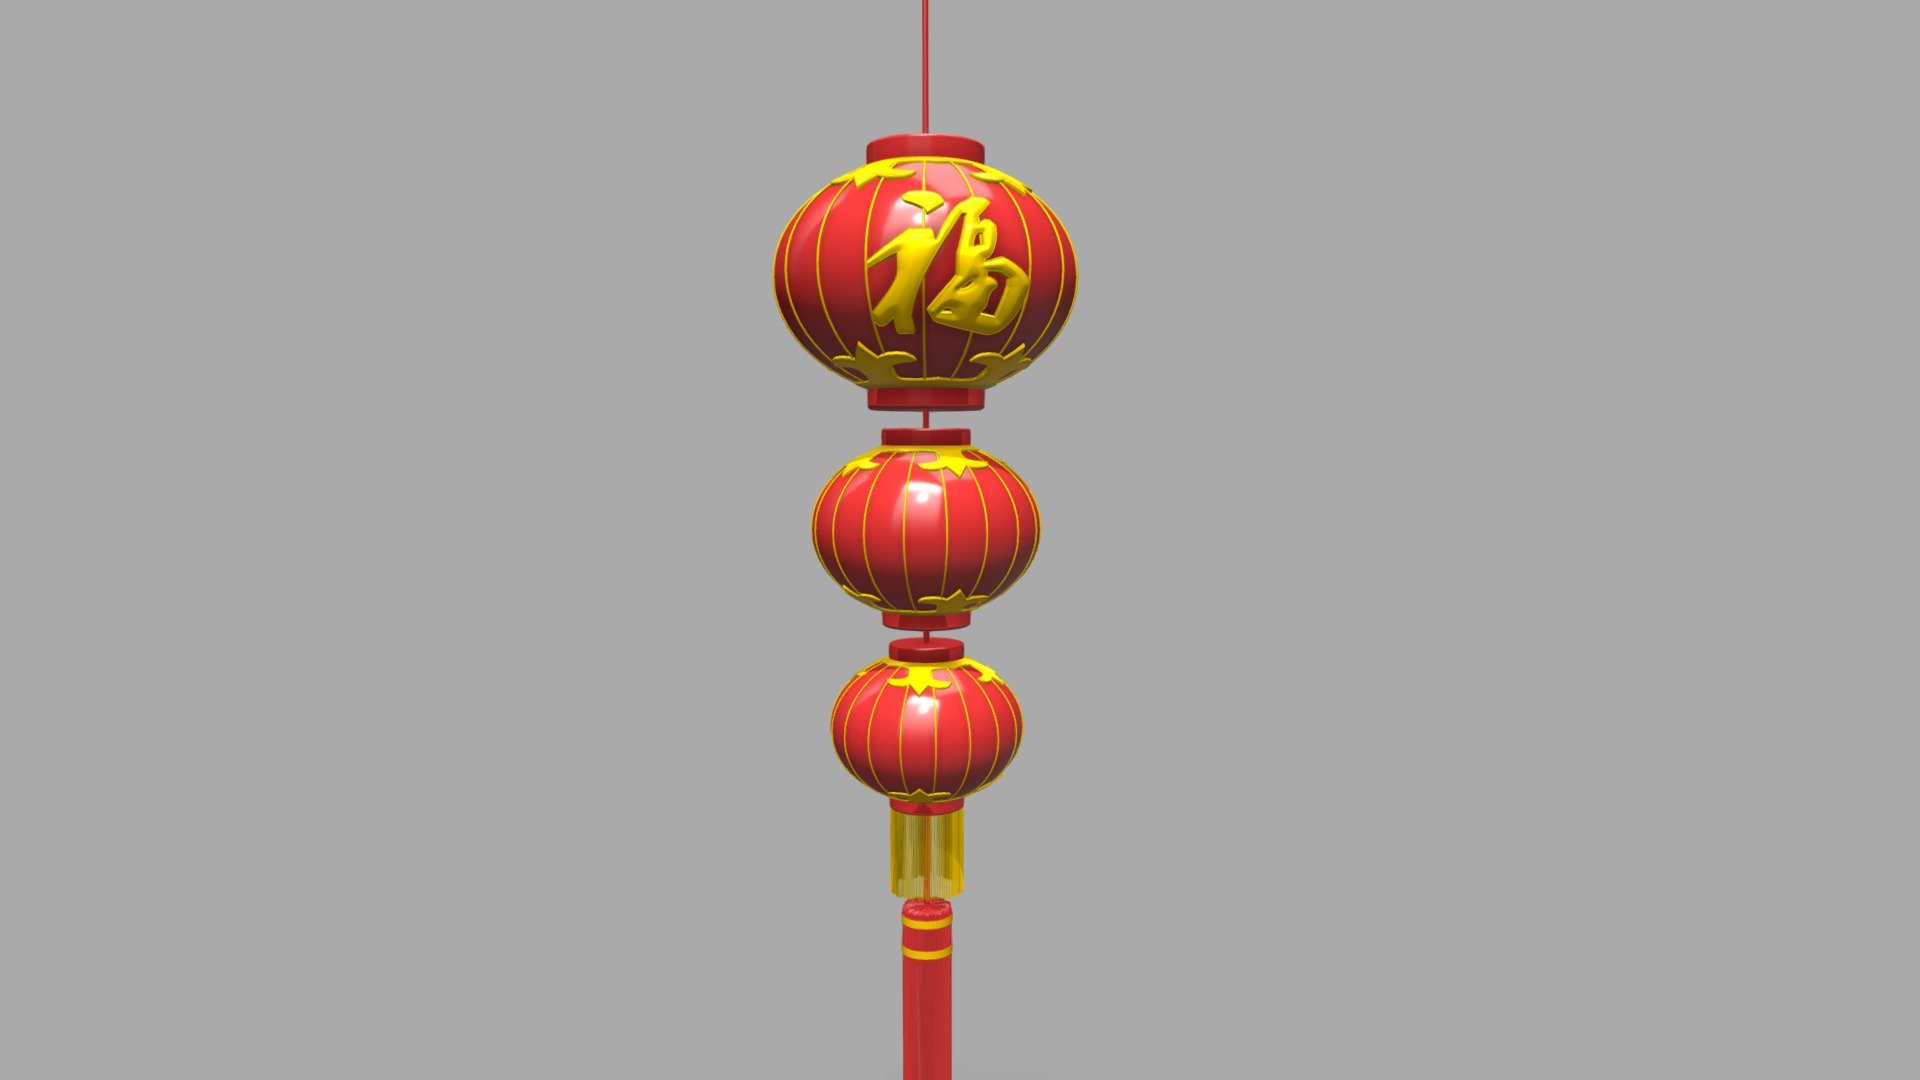 Asian elements, Lantern,

An essential decoration for the Chinese New Year. &ldquo;福